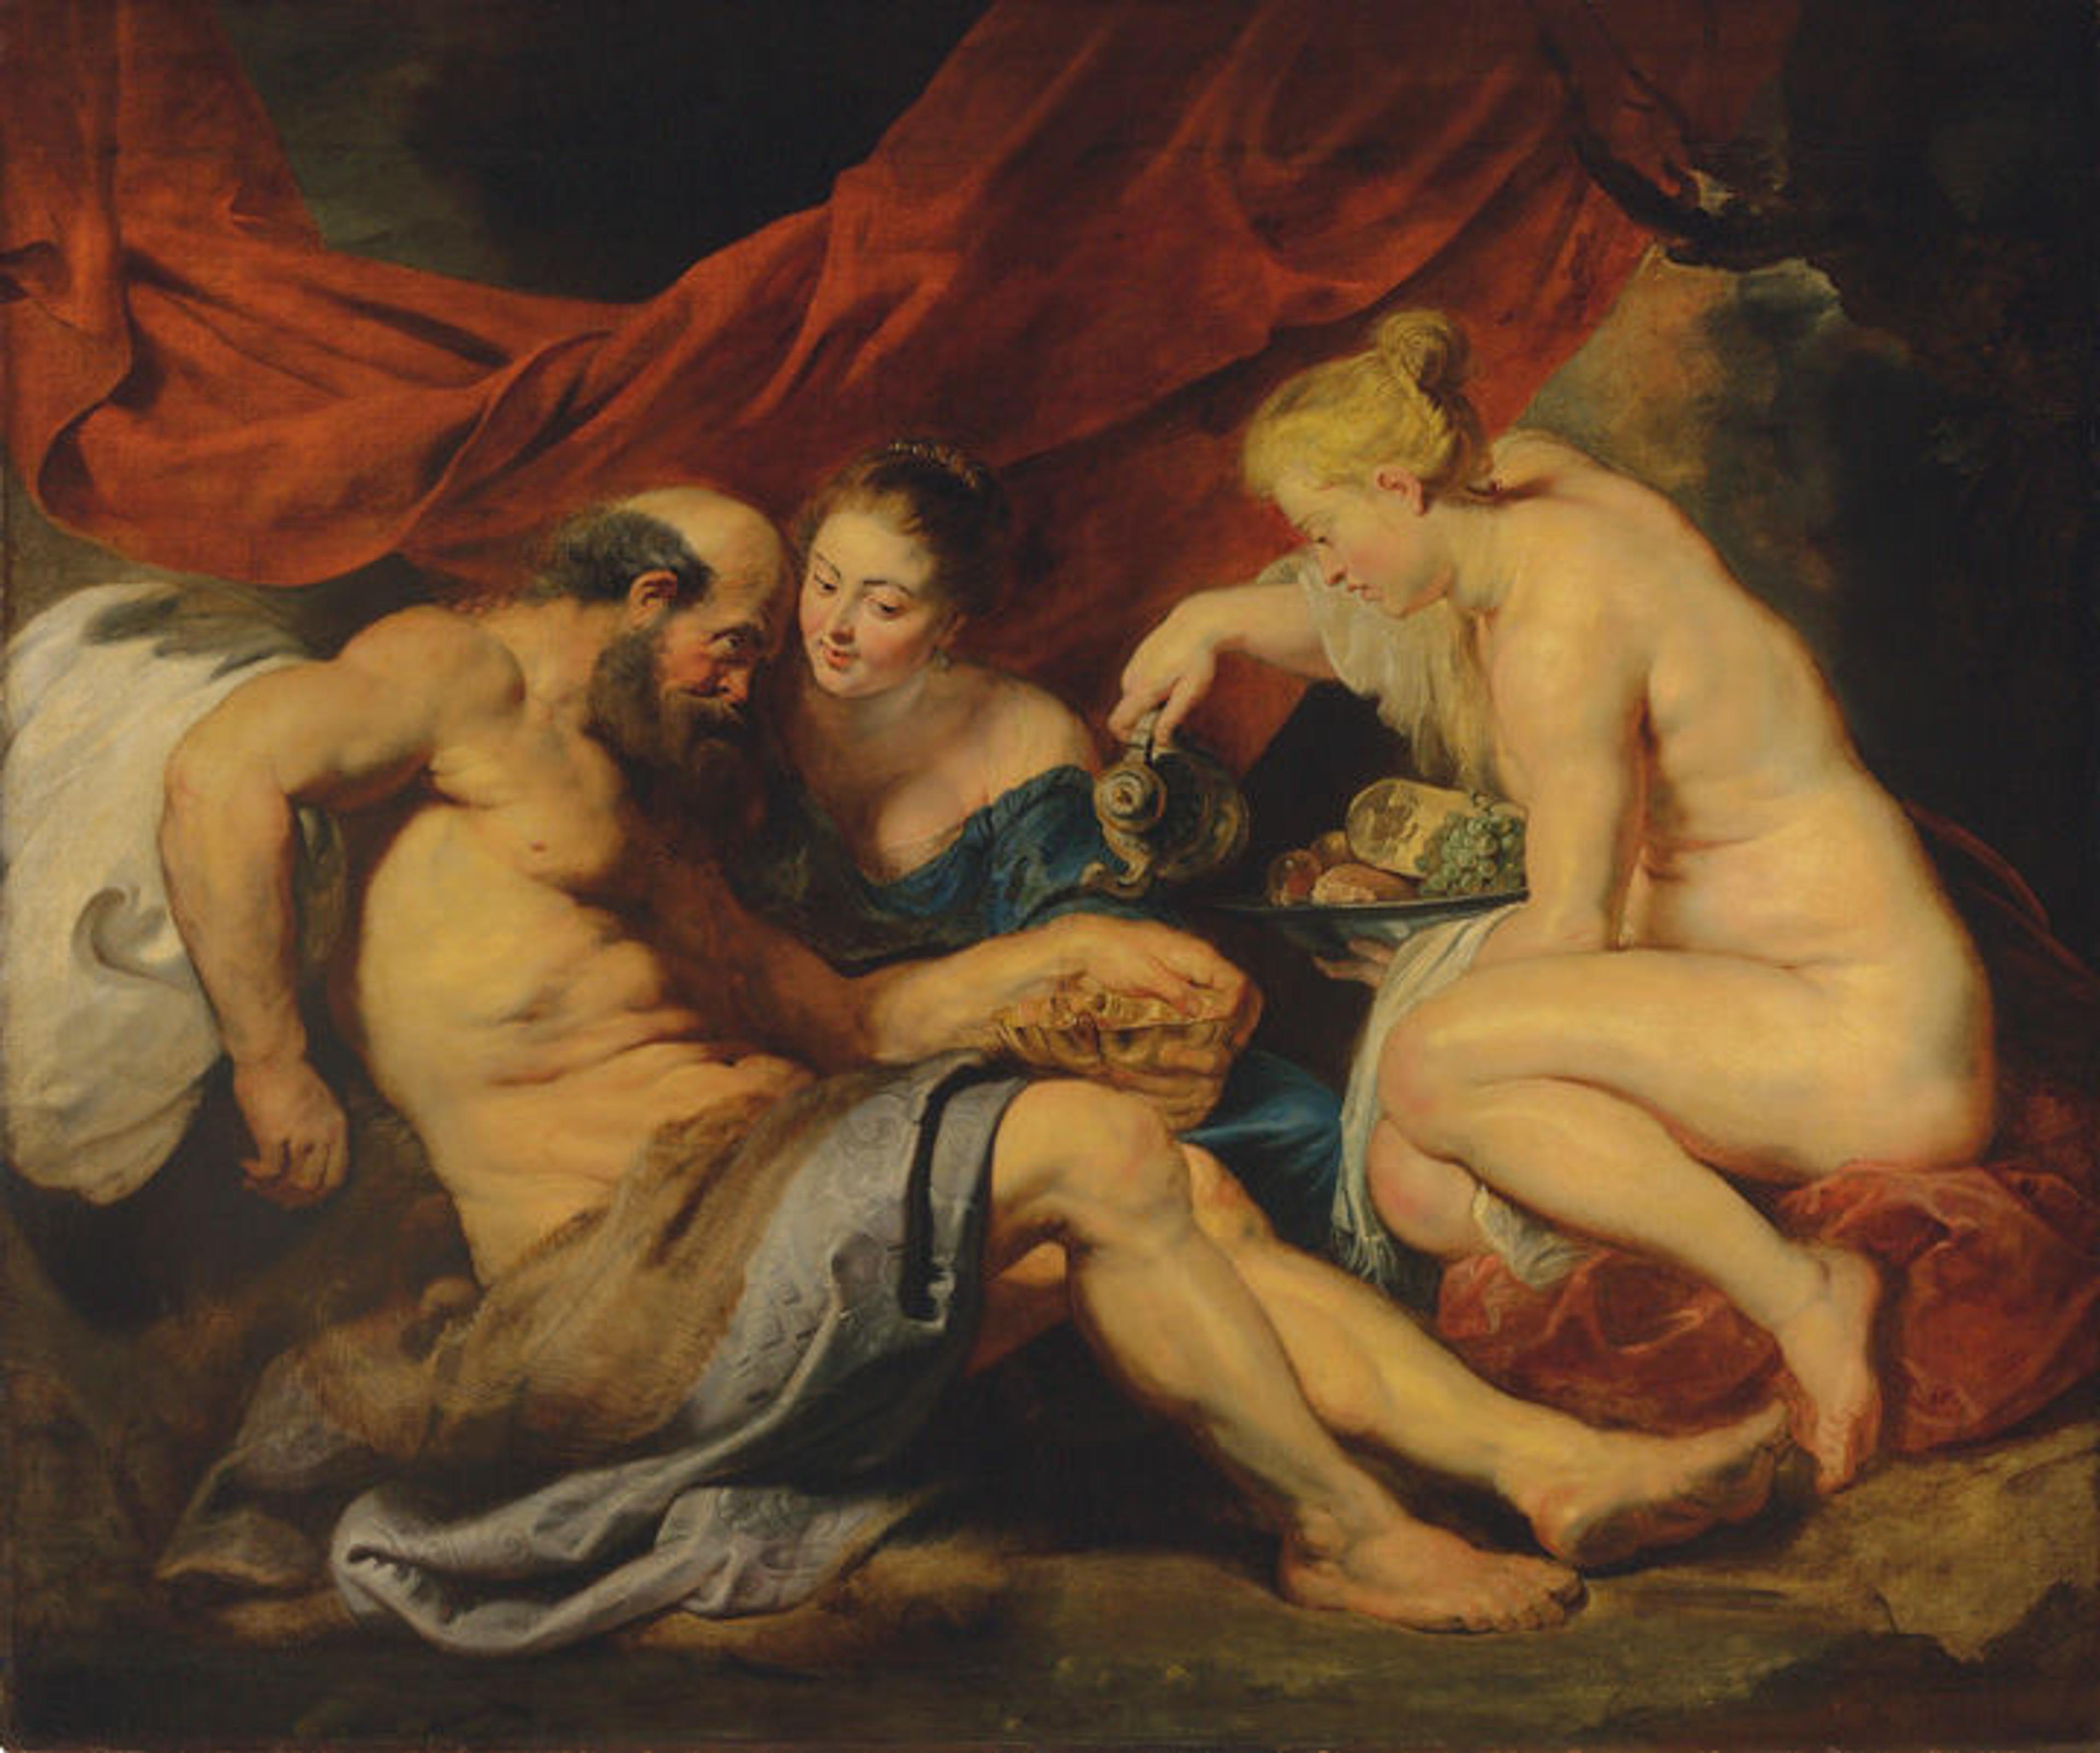 Seventeenth-century oil painting depicting the biblical character Lot facing his two daughters